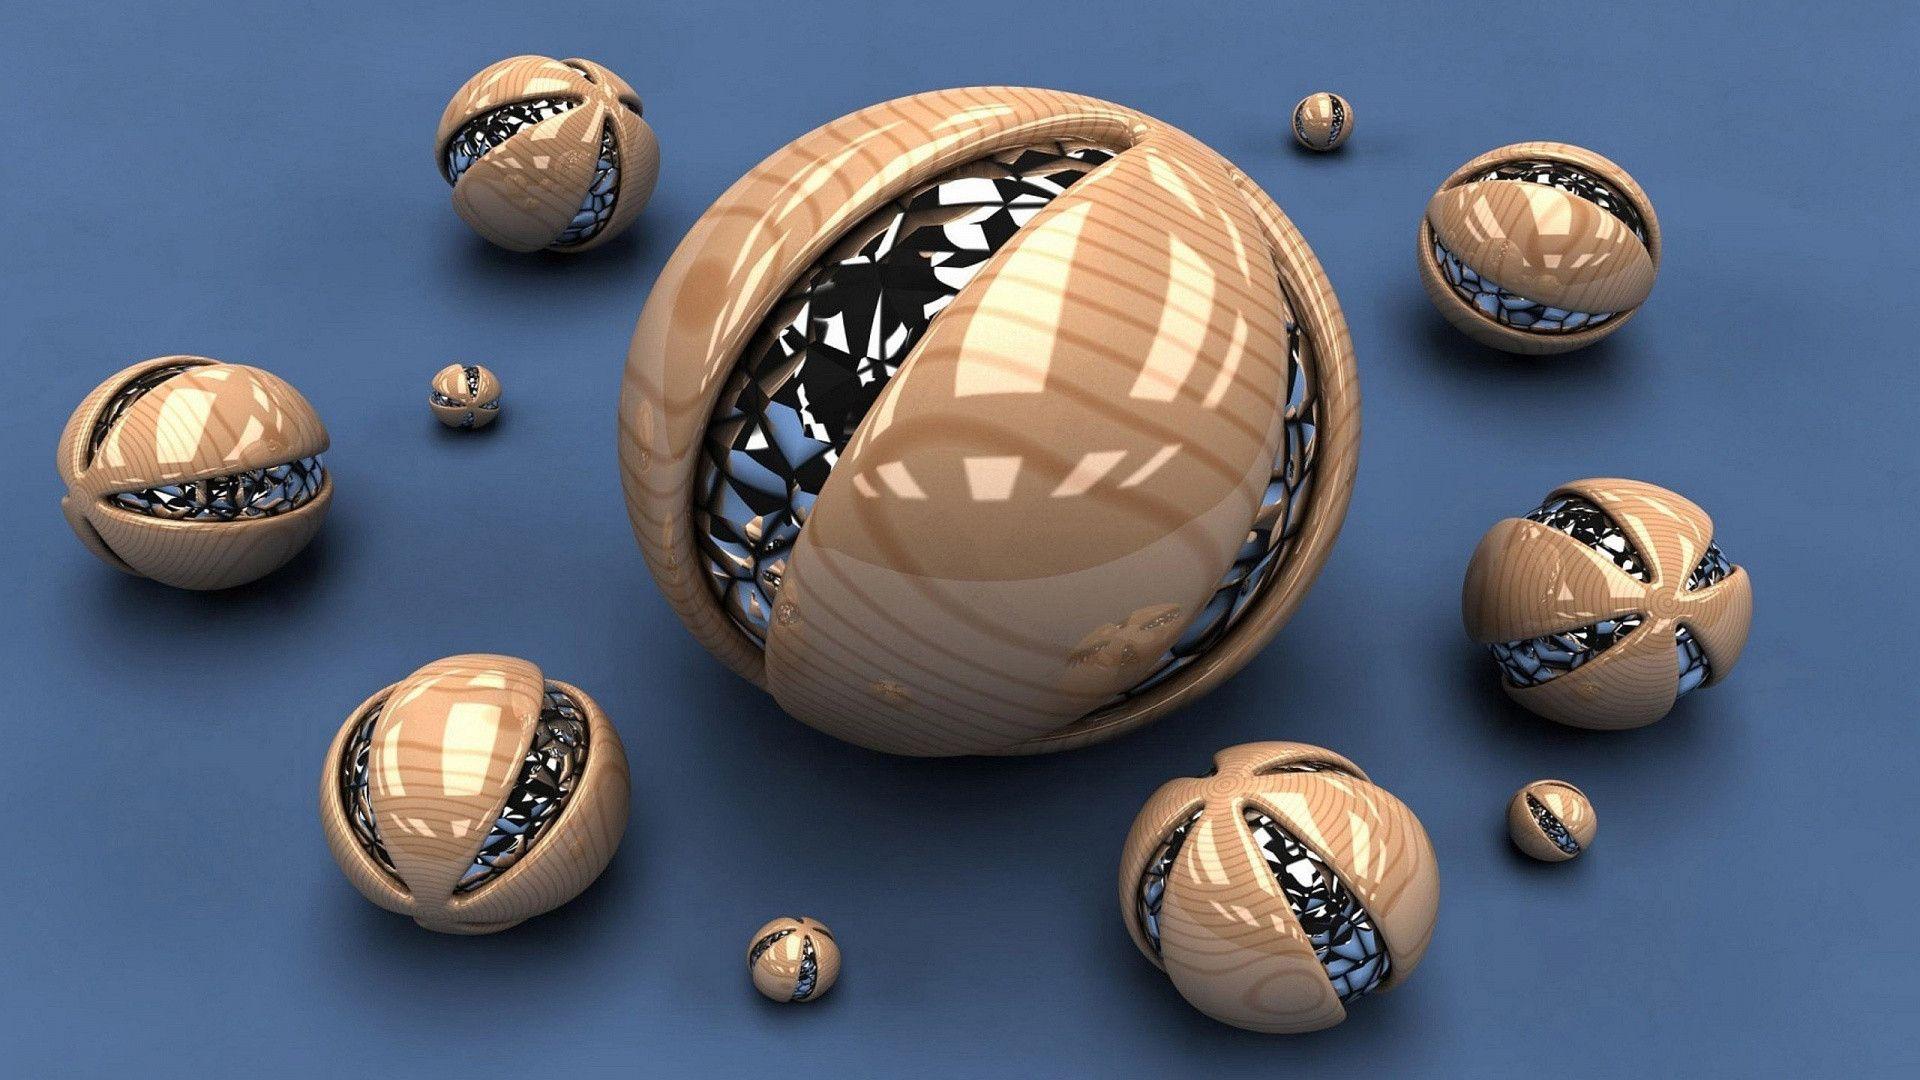 1920x1080 Cool 3D Spheres Wallpapers